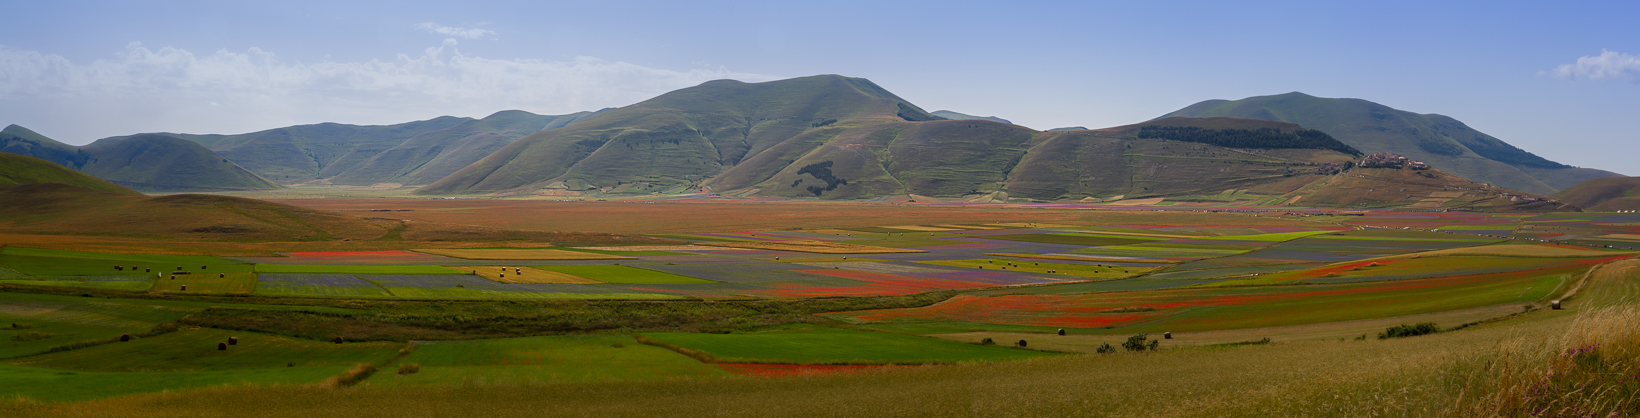 Overview of the great castelluccio...